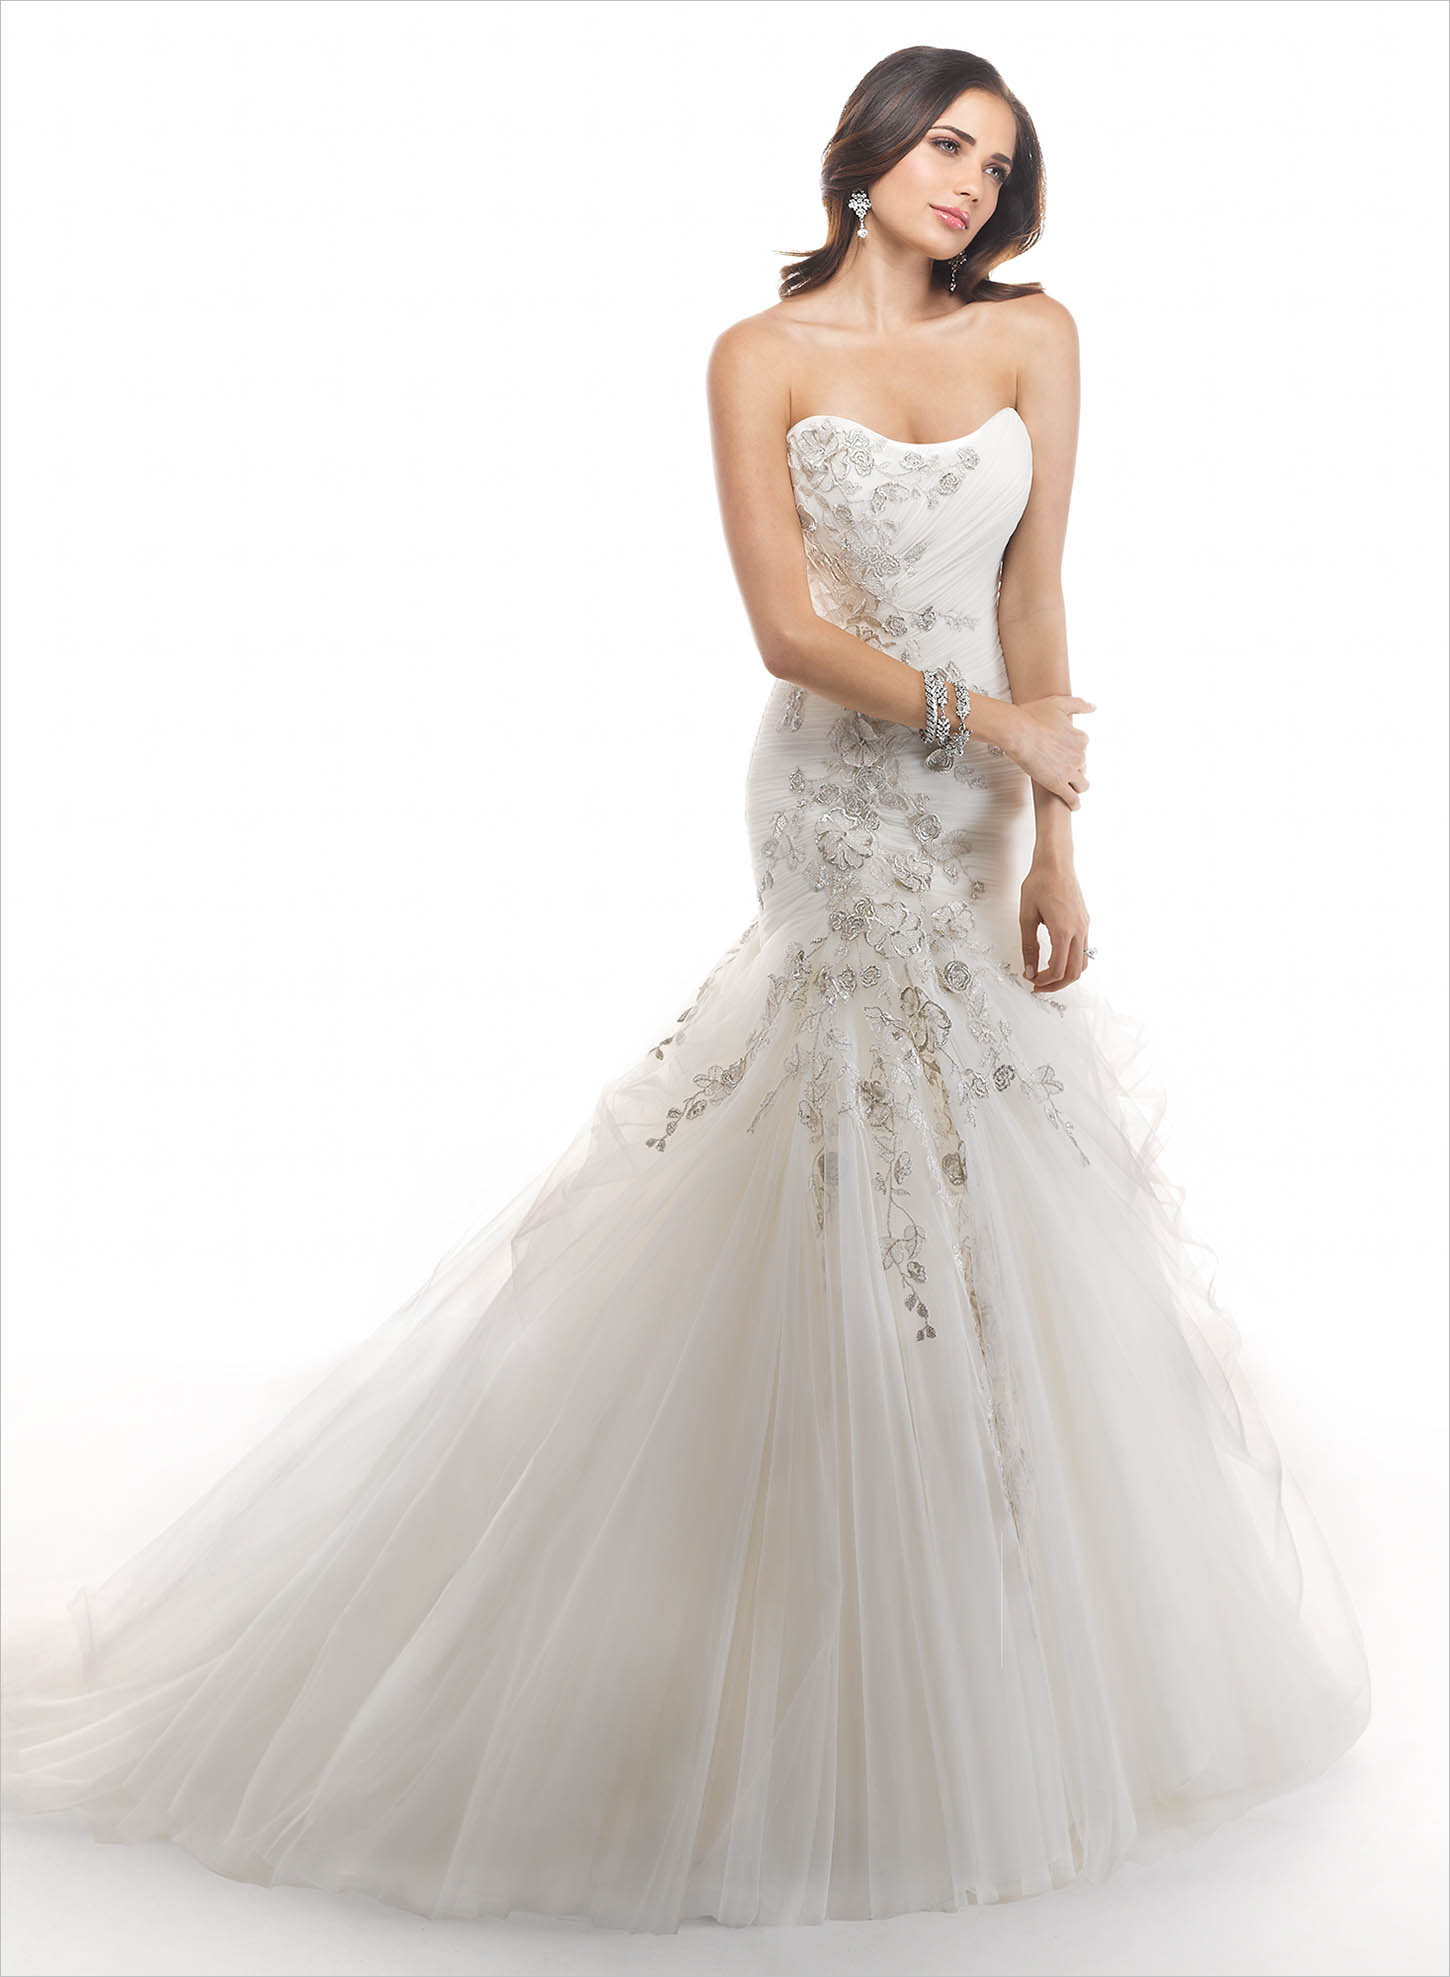 Bridal Gowns and Wedding Dresses by Maggie Sottero